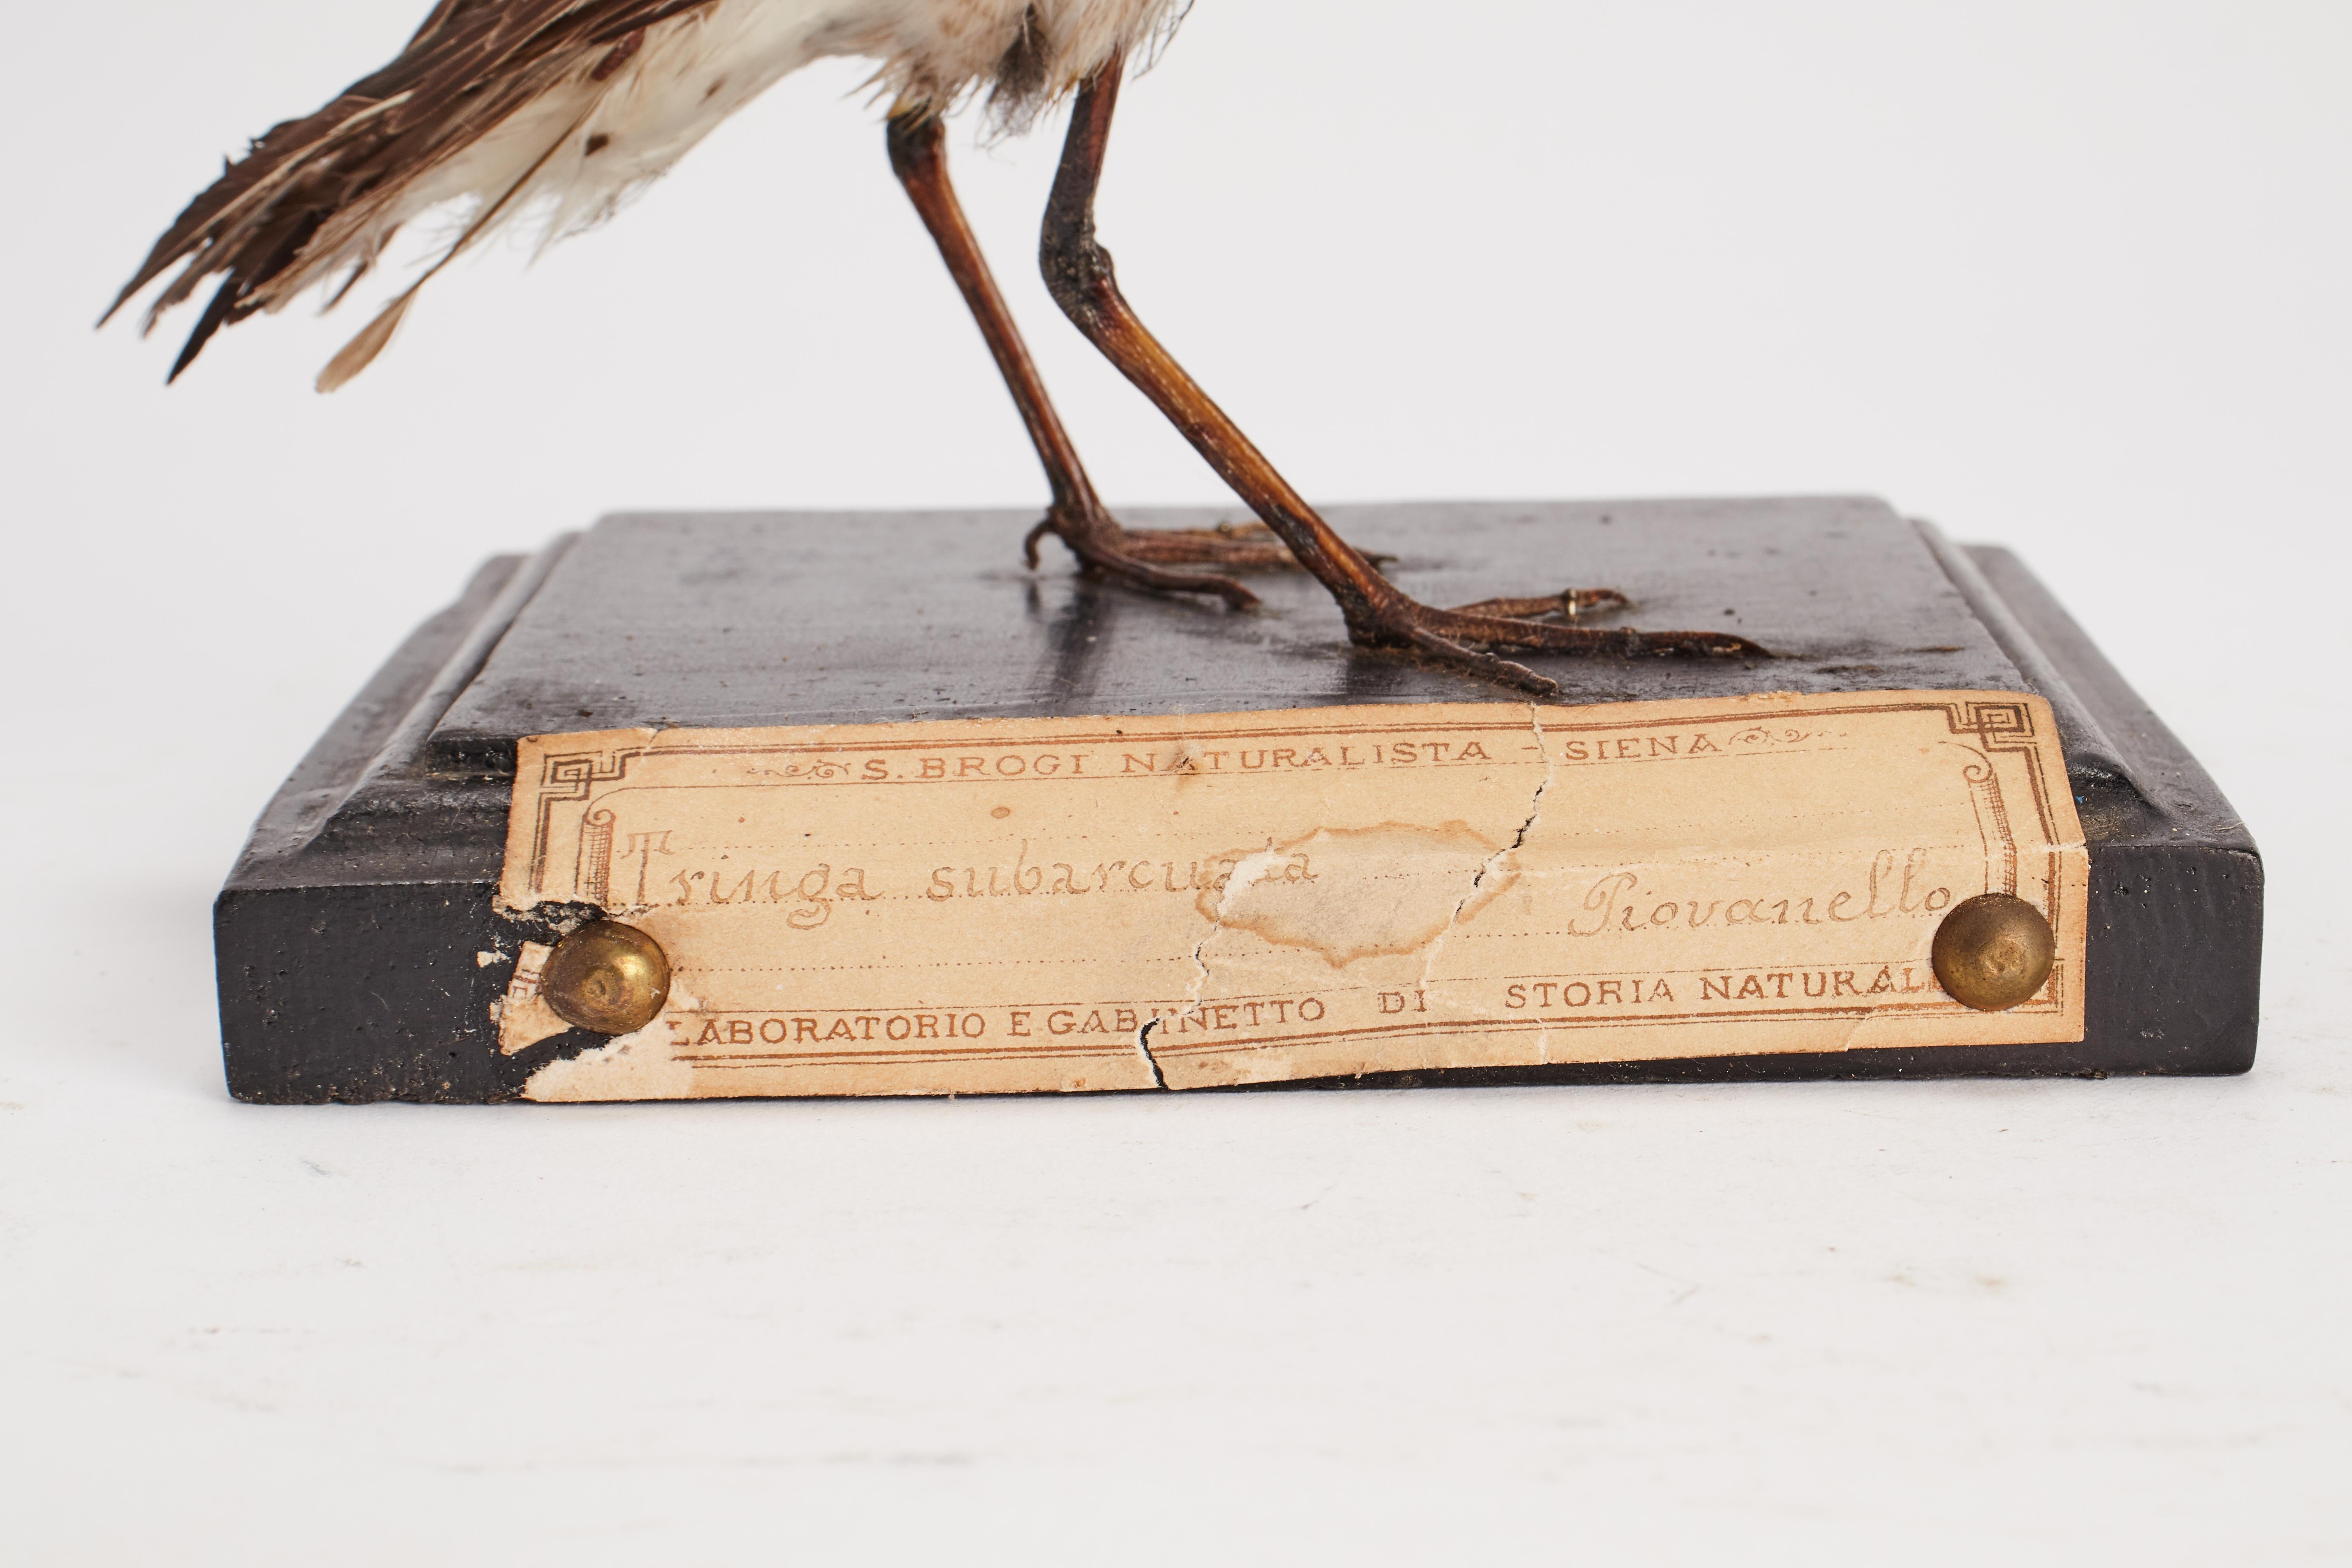 Natural specimen from Wunderkammer Stuffed bird Sandpiper (Tringa subarcuata) mounted on a wooden base with cartouche Specimen for laboratory and Natural history cabinet. S. Brogi Naturalista. Siena, Italy 1880 ca.